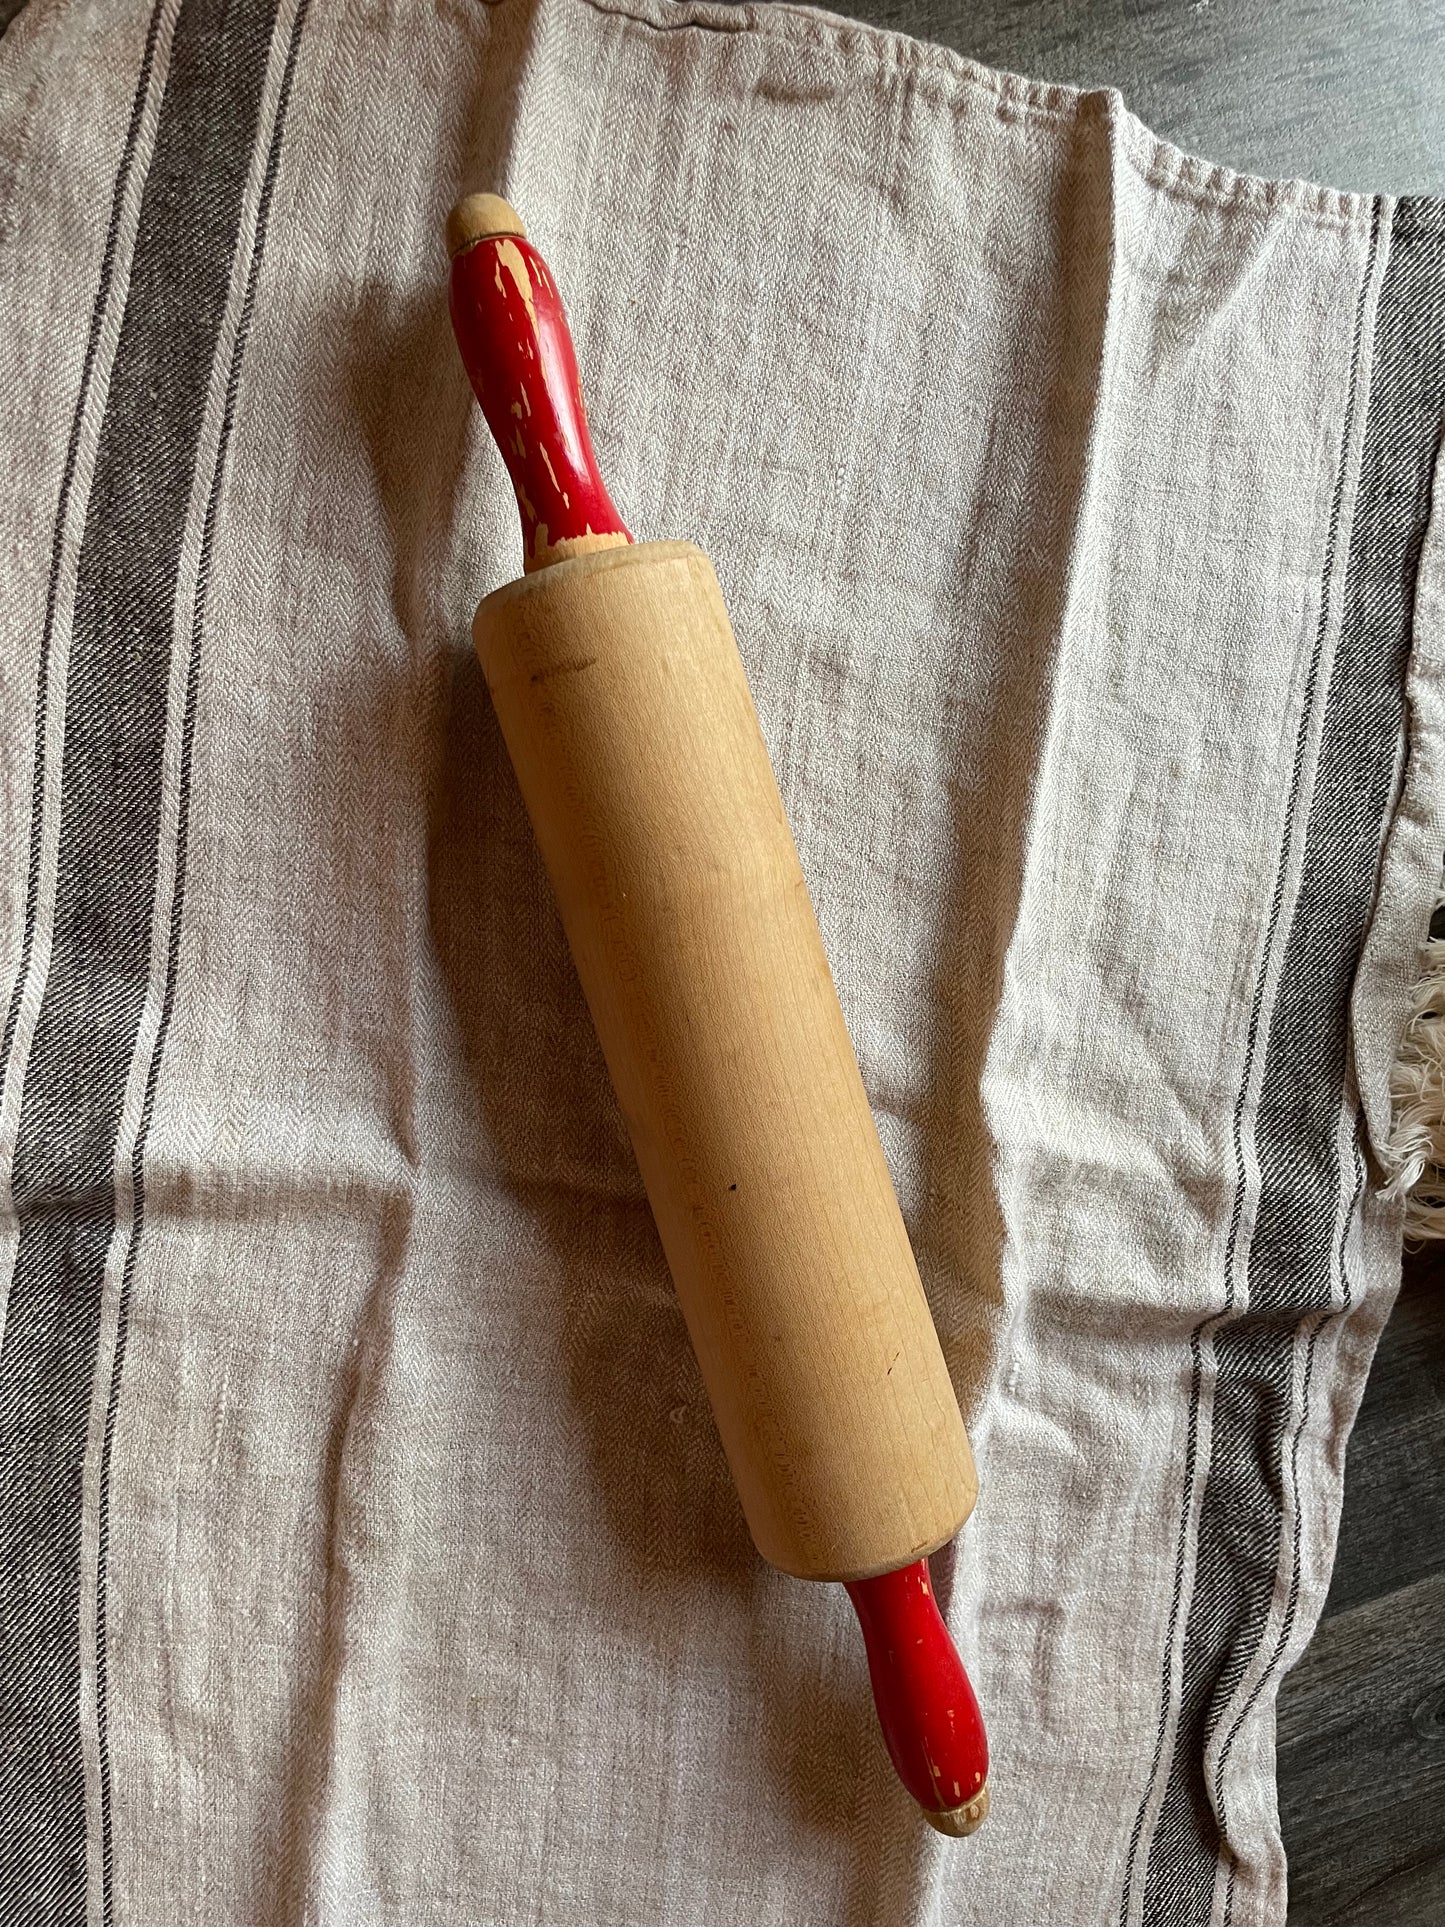 Traditional Vintage Rolling Pin with Distressed Red Handles